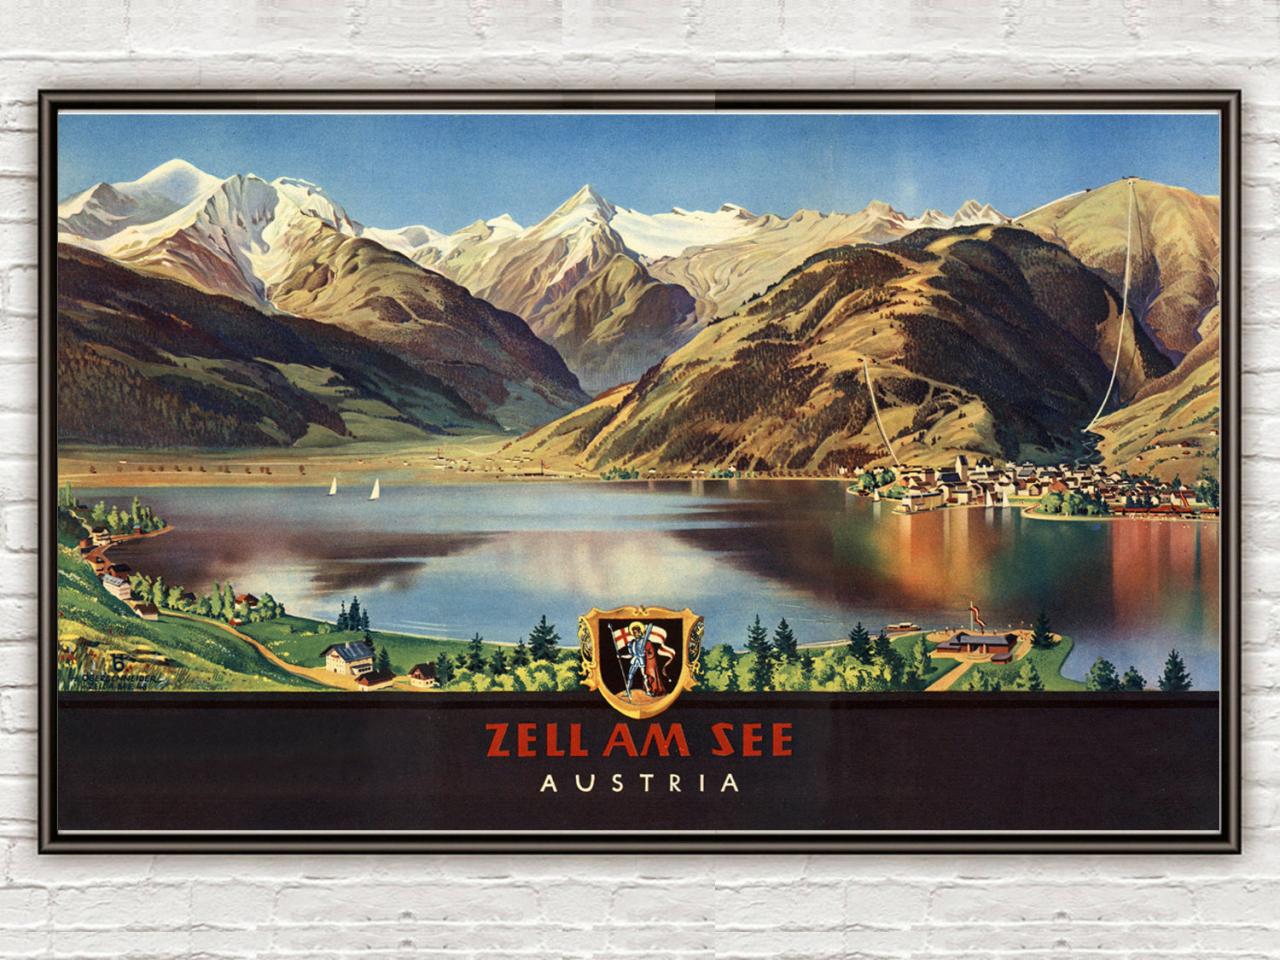 Vintage Poster Of Austria Zell Am See, Travel Poster